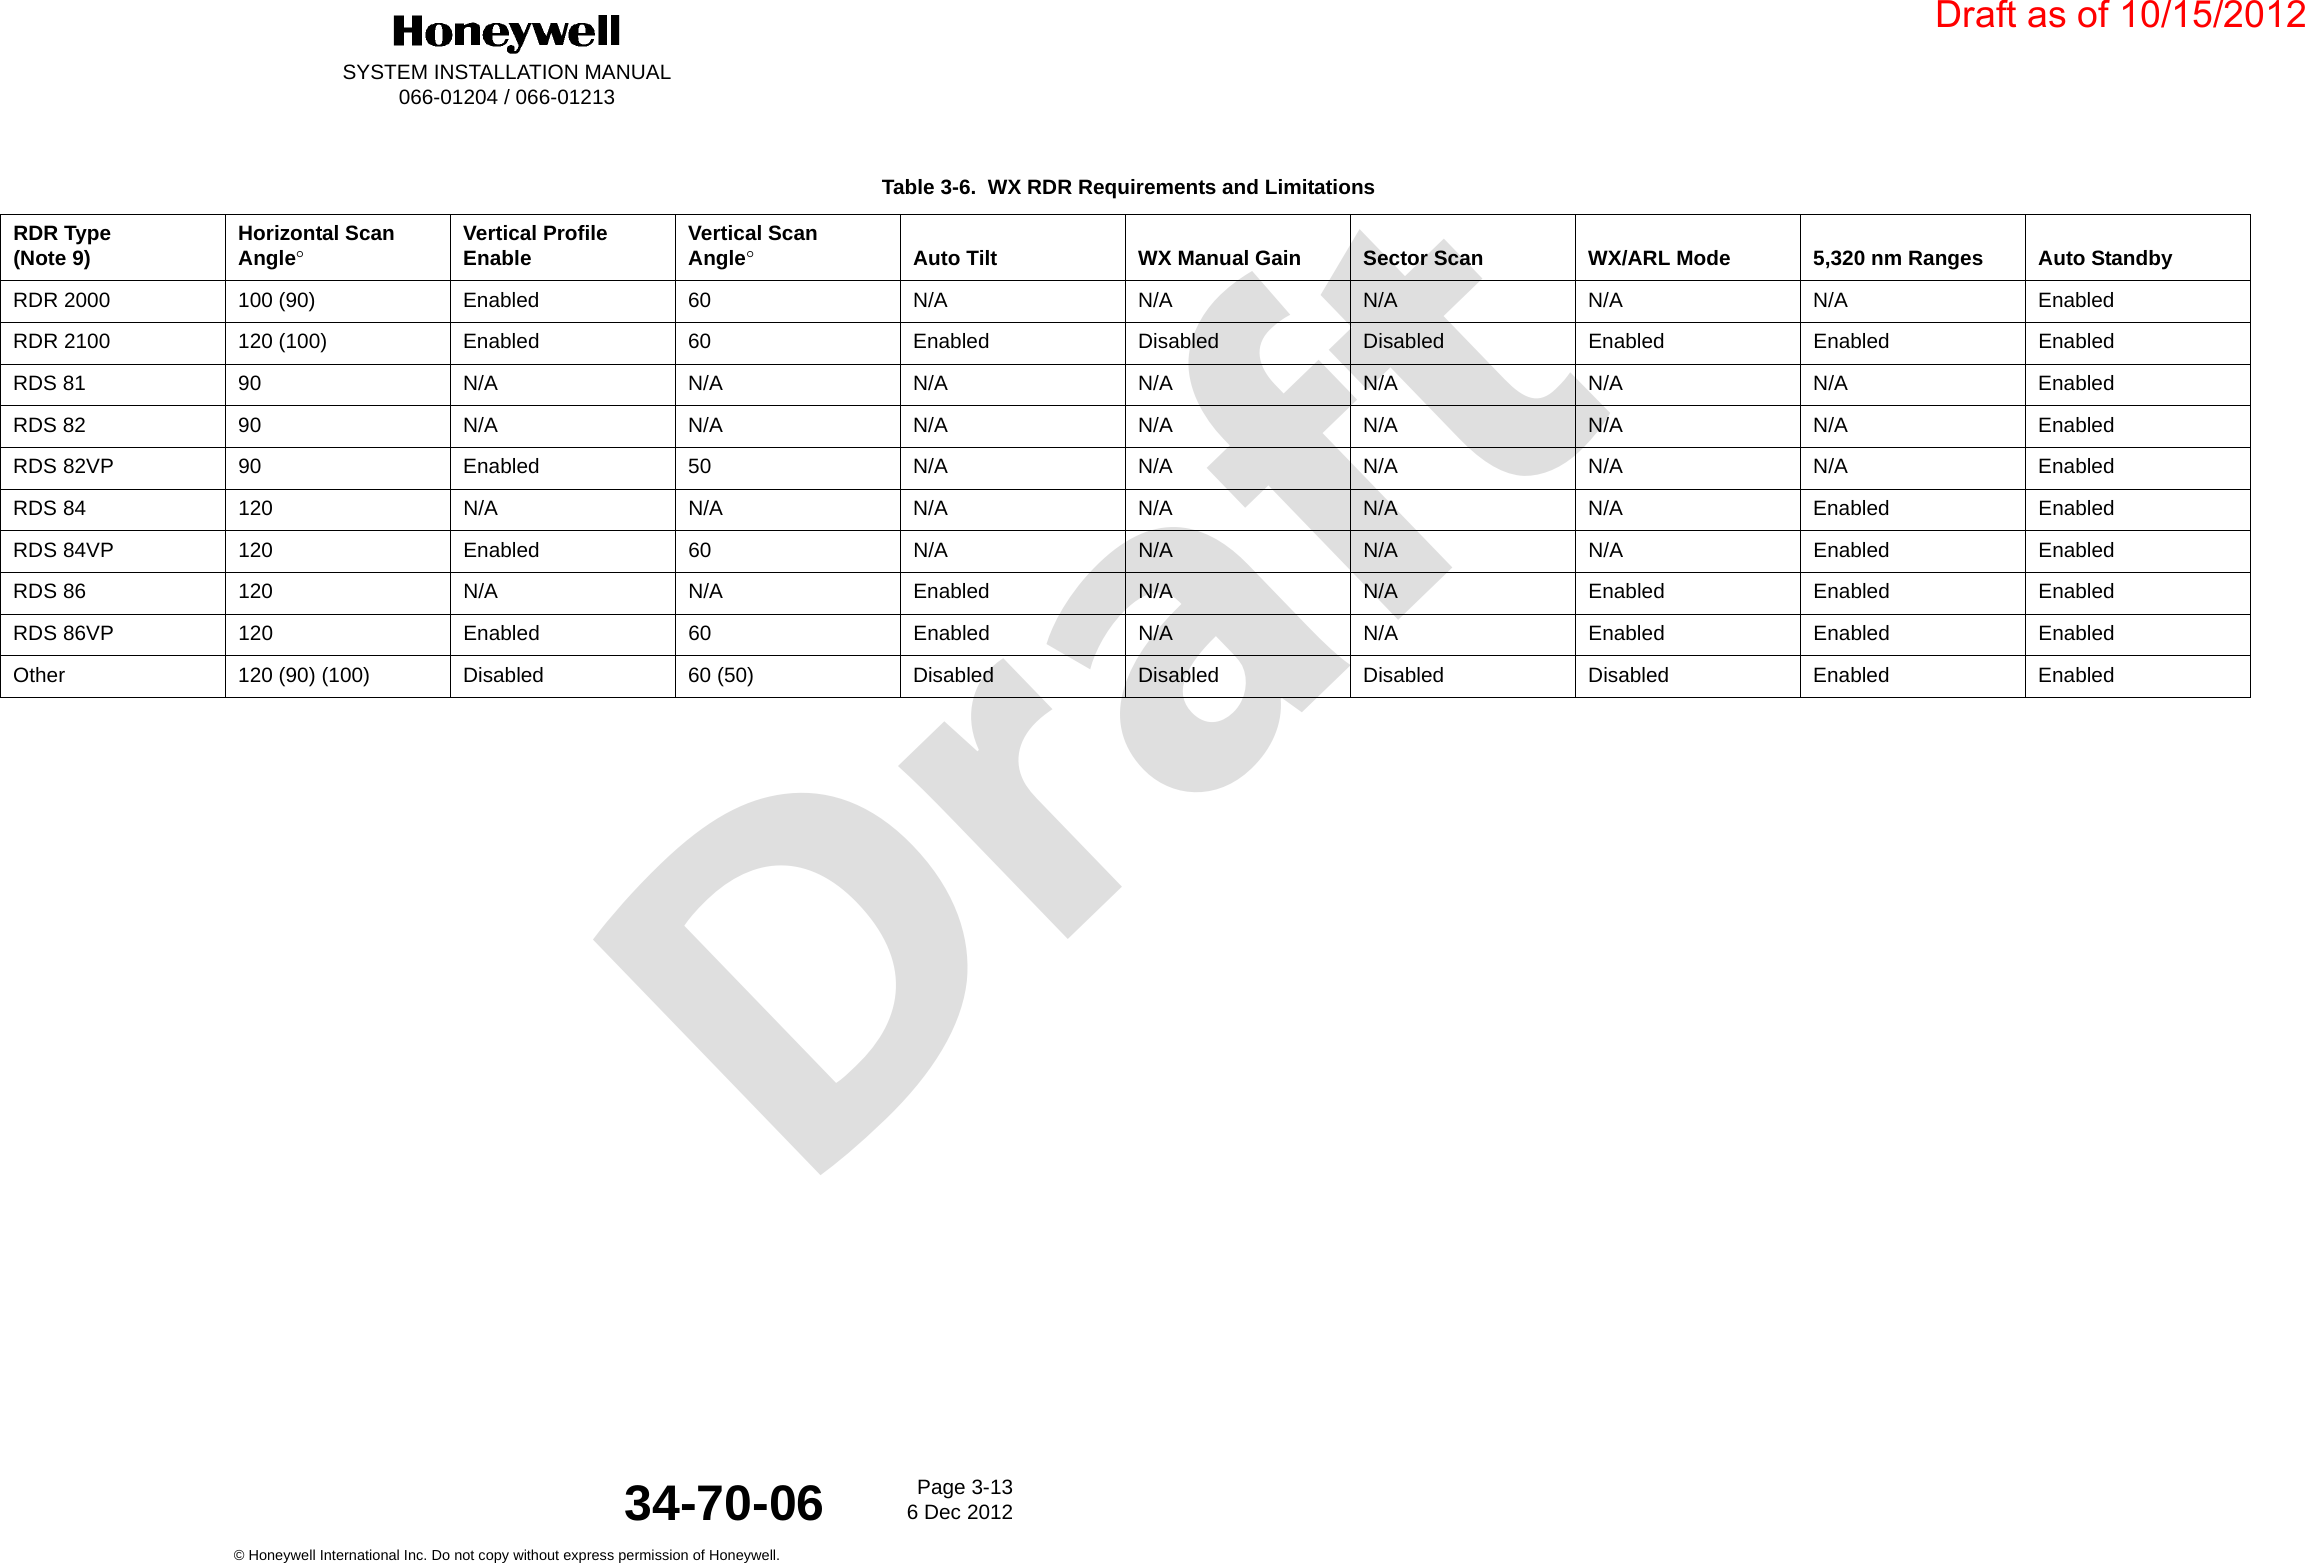 DraftSYSTEM INSTALLATION MANUAL066-01204 / 066-01213Page 3-136 Dec 2012© Honeywell International Inc. Do not copy without express permission of Honeywell.34-70-06 Table 3-6.  WX RDR Requirements and LimitationsRDR Type(Note 9) Horizontal Scan AngleVertical Profile Enable Vertical ScanAngleAuto Tilt WX Manual Gain Sector Scan WX/ARL Mode 5,320 nm Ranges Auto StandbyRDR 2000 100 (90) Enabled 60 N/A N/A N/A N/A N/A EnabledRDR 2100 120 (100) Enabled 60 Enabled Disabled Disabled Enabled Enabled EnabledRDS 8190 N/AN/AN/AN/AN/AN/AN/AEnabledRDS 8290 N/AN/AN/AN/AN/AN/AN/AEnabledRDS 82VP 90 Enabled 50 N/A N/A N/A N/A N/A EnabledRDS 84 120 N/A N/A N/A N/A N/A N/A Enabled EnabledRDS 84VP 120 Enabled 60 N/A N/A N/A N/A Enabled EnabledRDS 86 120 N/A N/A Enabled N/A N/A Enabled Enabled EnabledRDS 86VP 120 Enabled 60 Enabled N/A N/A Enabled Enabled EnabledOther 120 (90) (100) Disabled 60 (50) Disabled Disabled Disabled Disabled Enabled EnabledDraft as of 10/15/2012